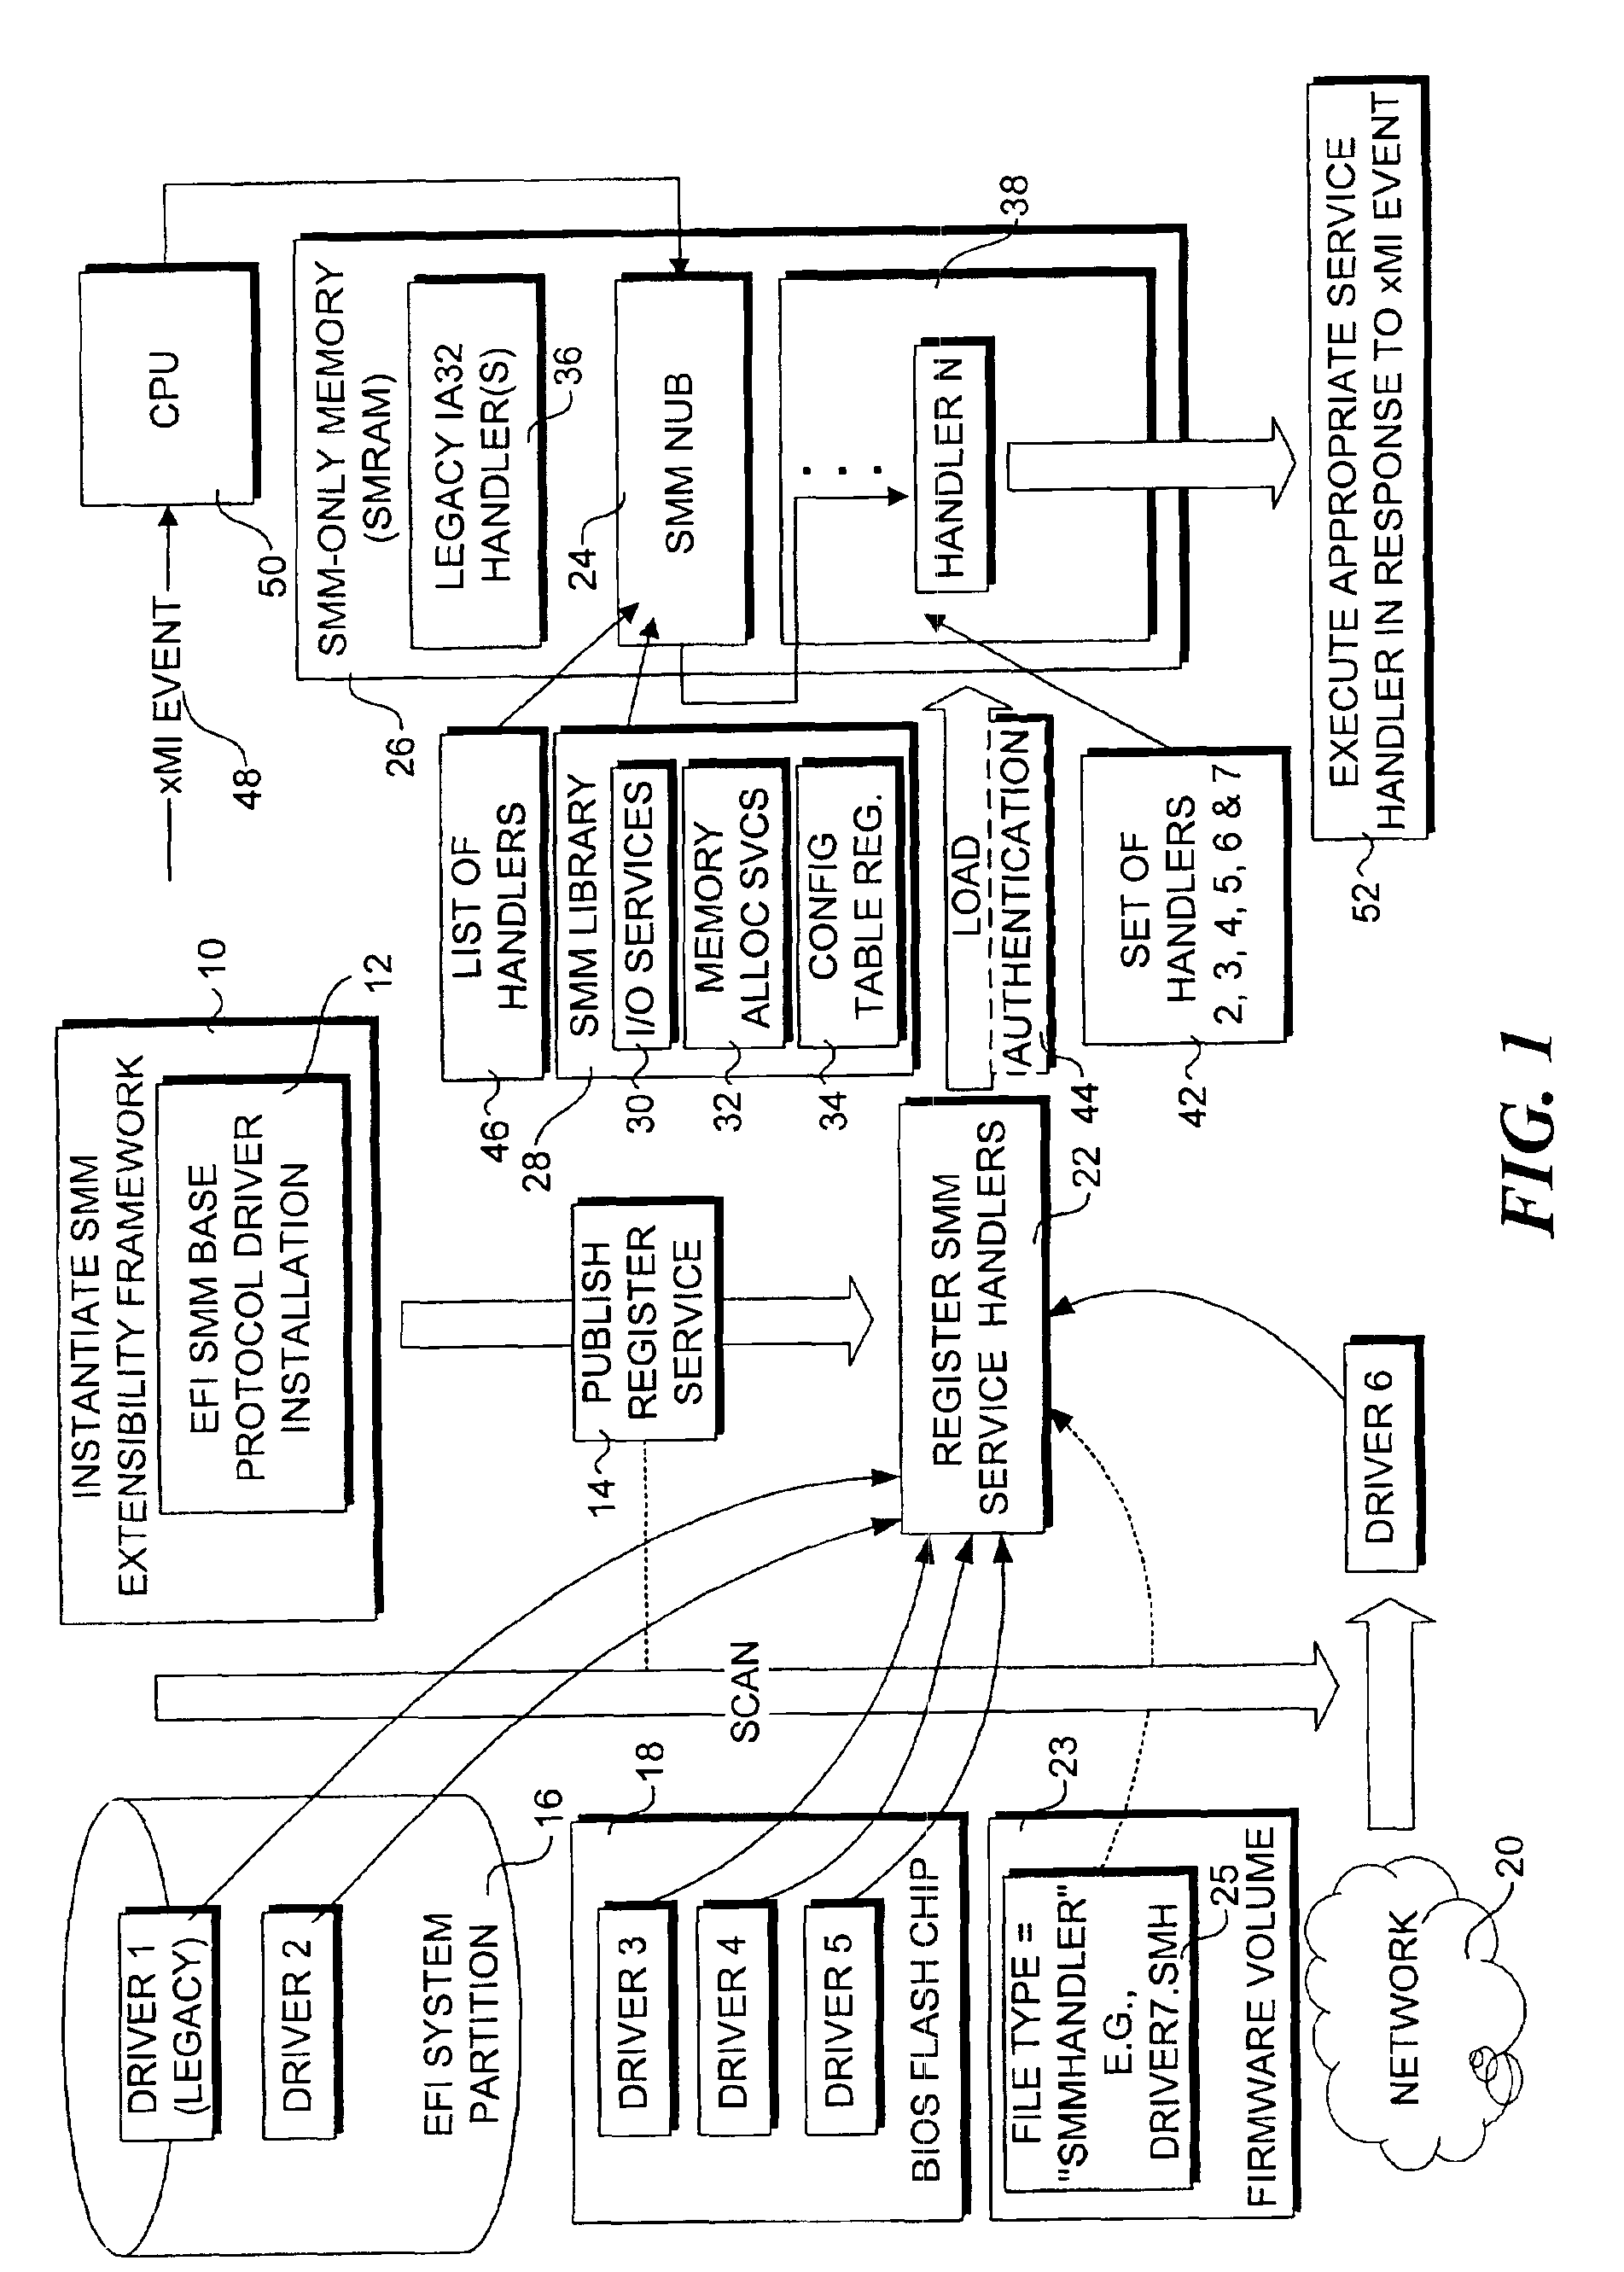 SMM loader and execution mechanism for component software for multiple architectures